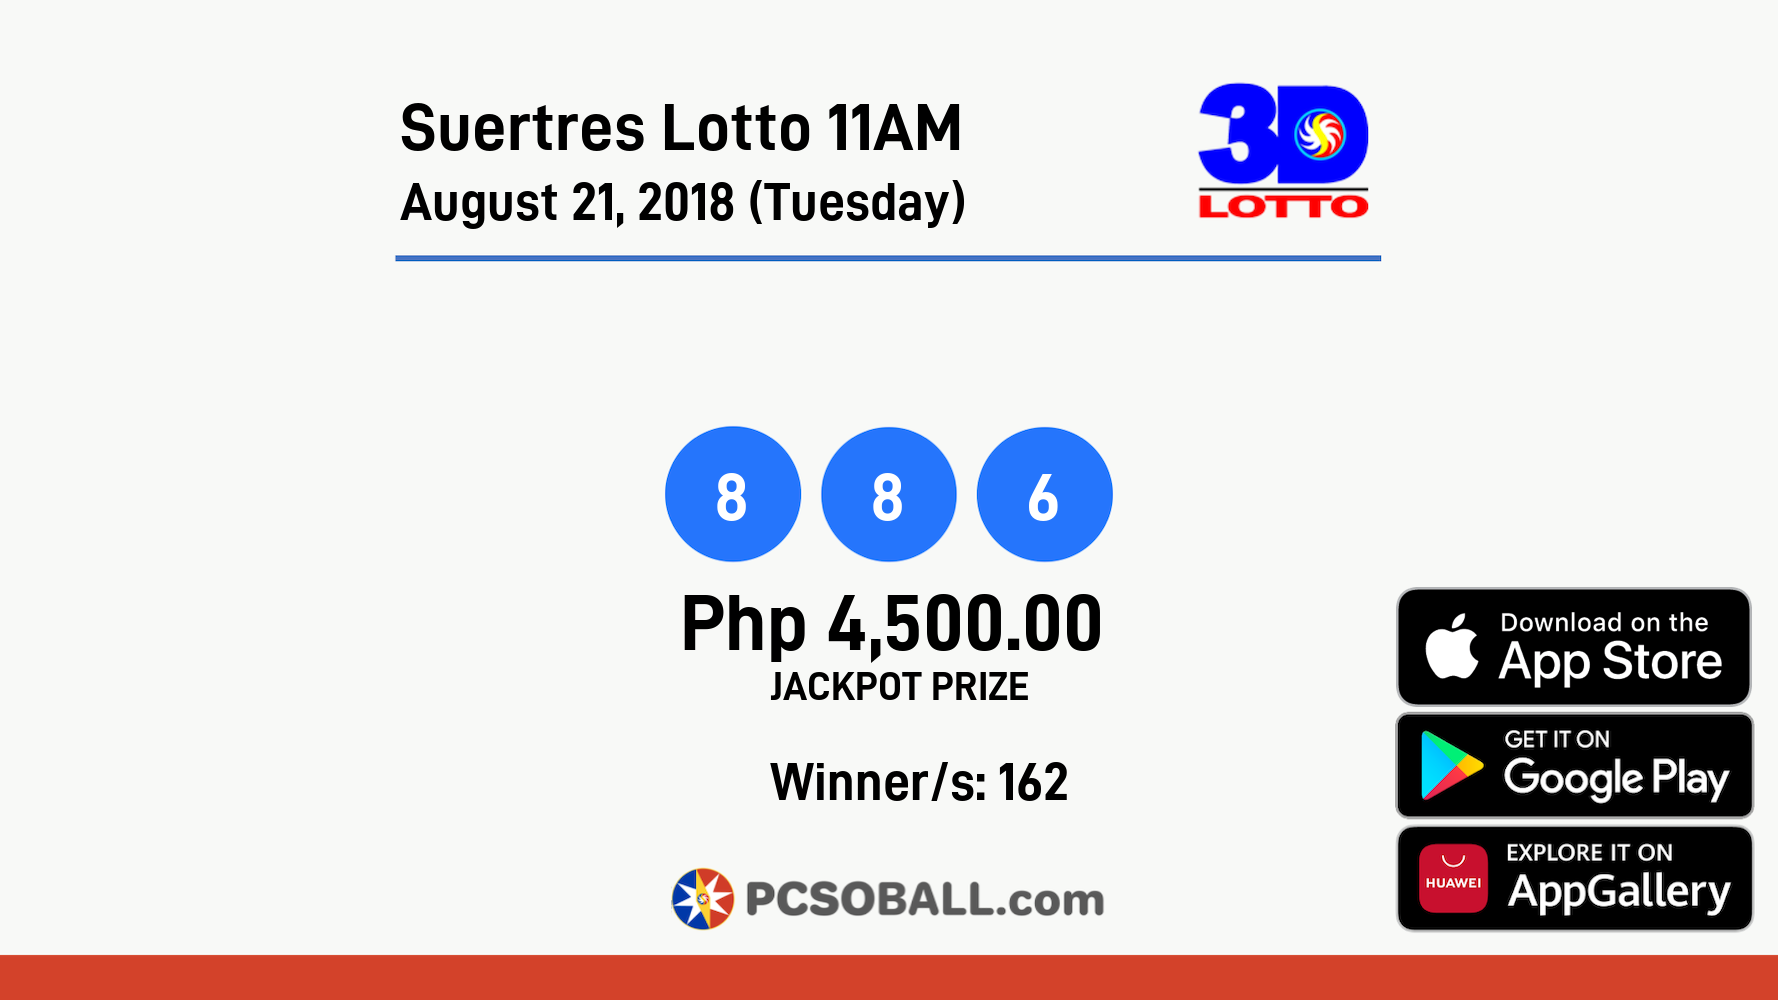 Suertres Lotto 11AM August 21, 2018 (Tuesday) Result